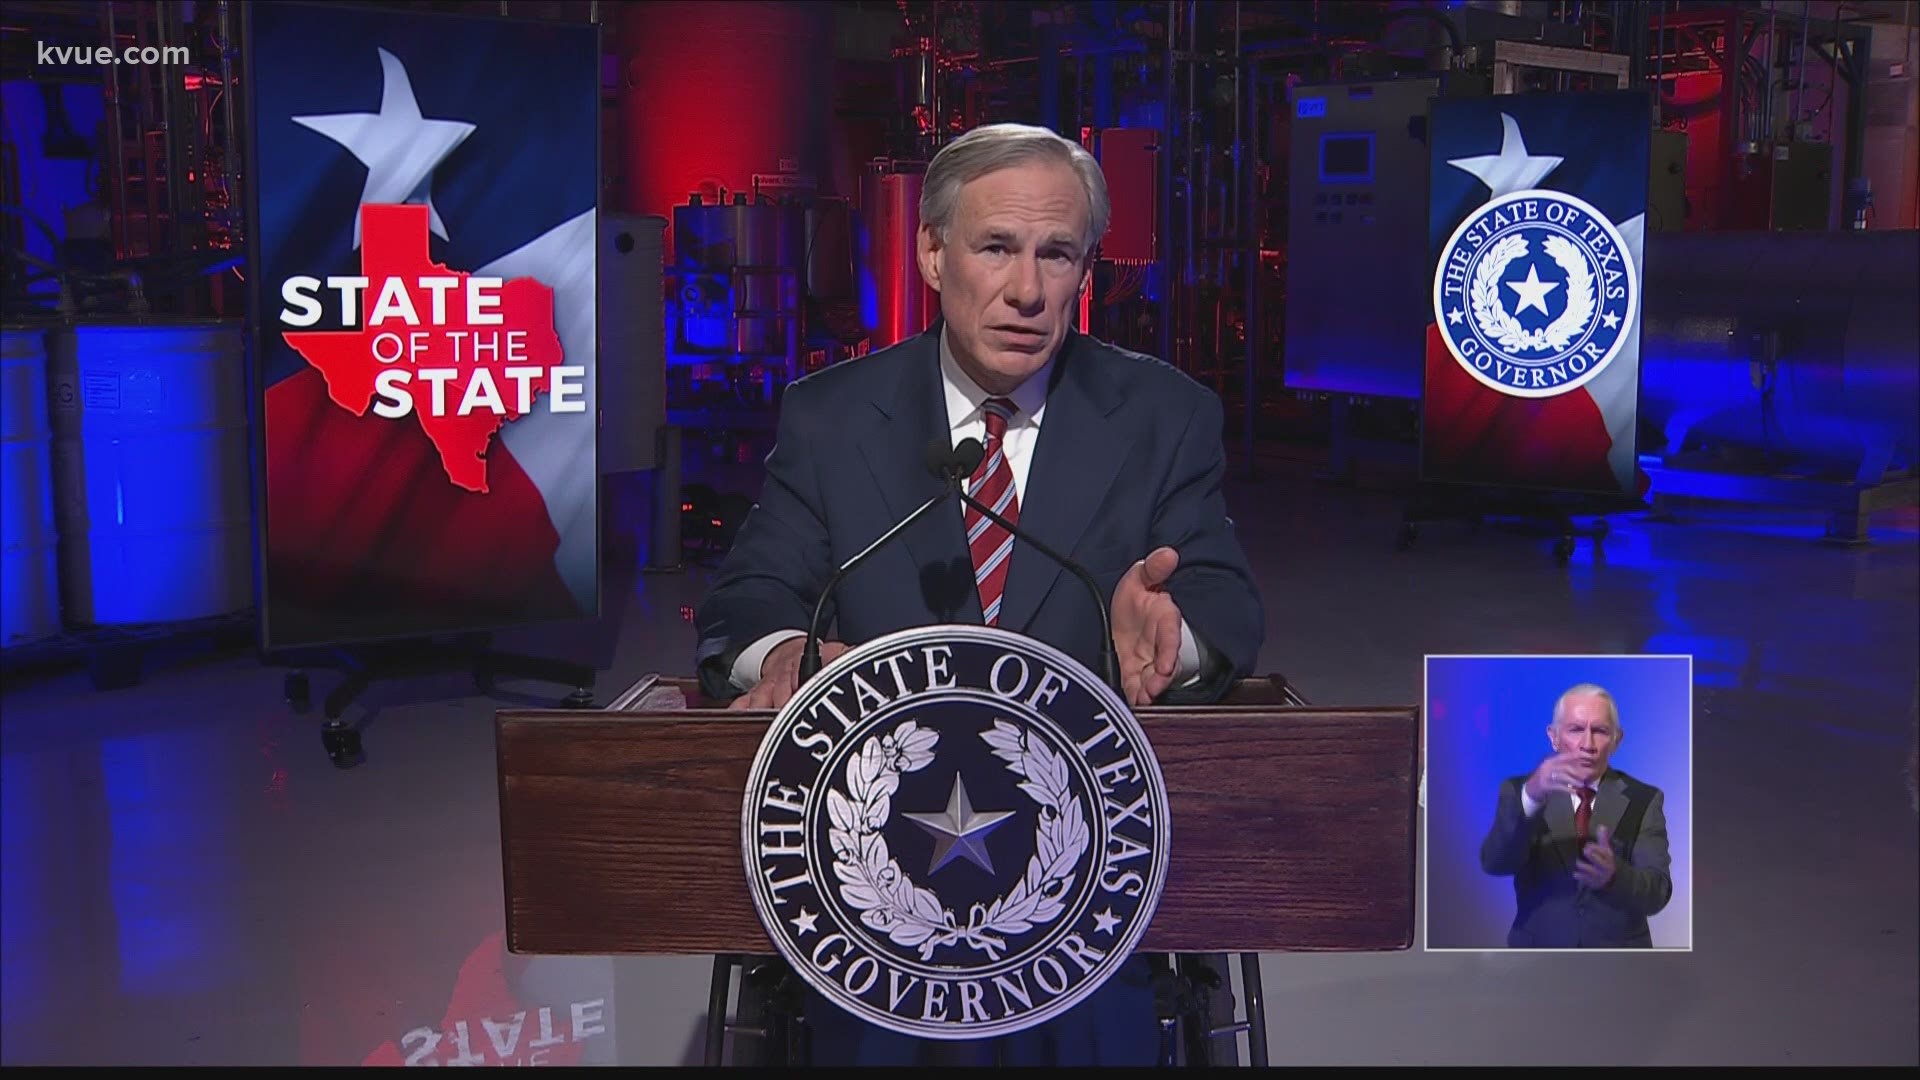 Gov. Greg Abbott made the call for an abortion ban during his State of the State address.